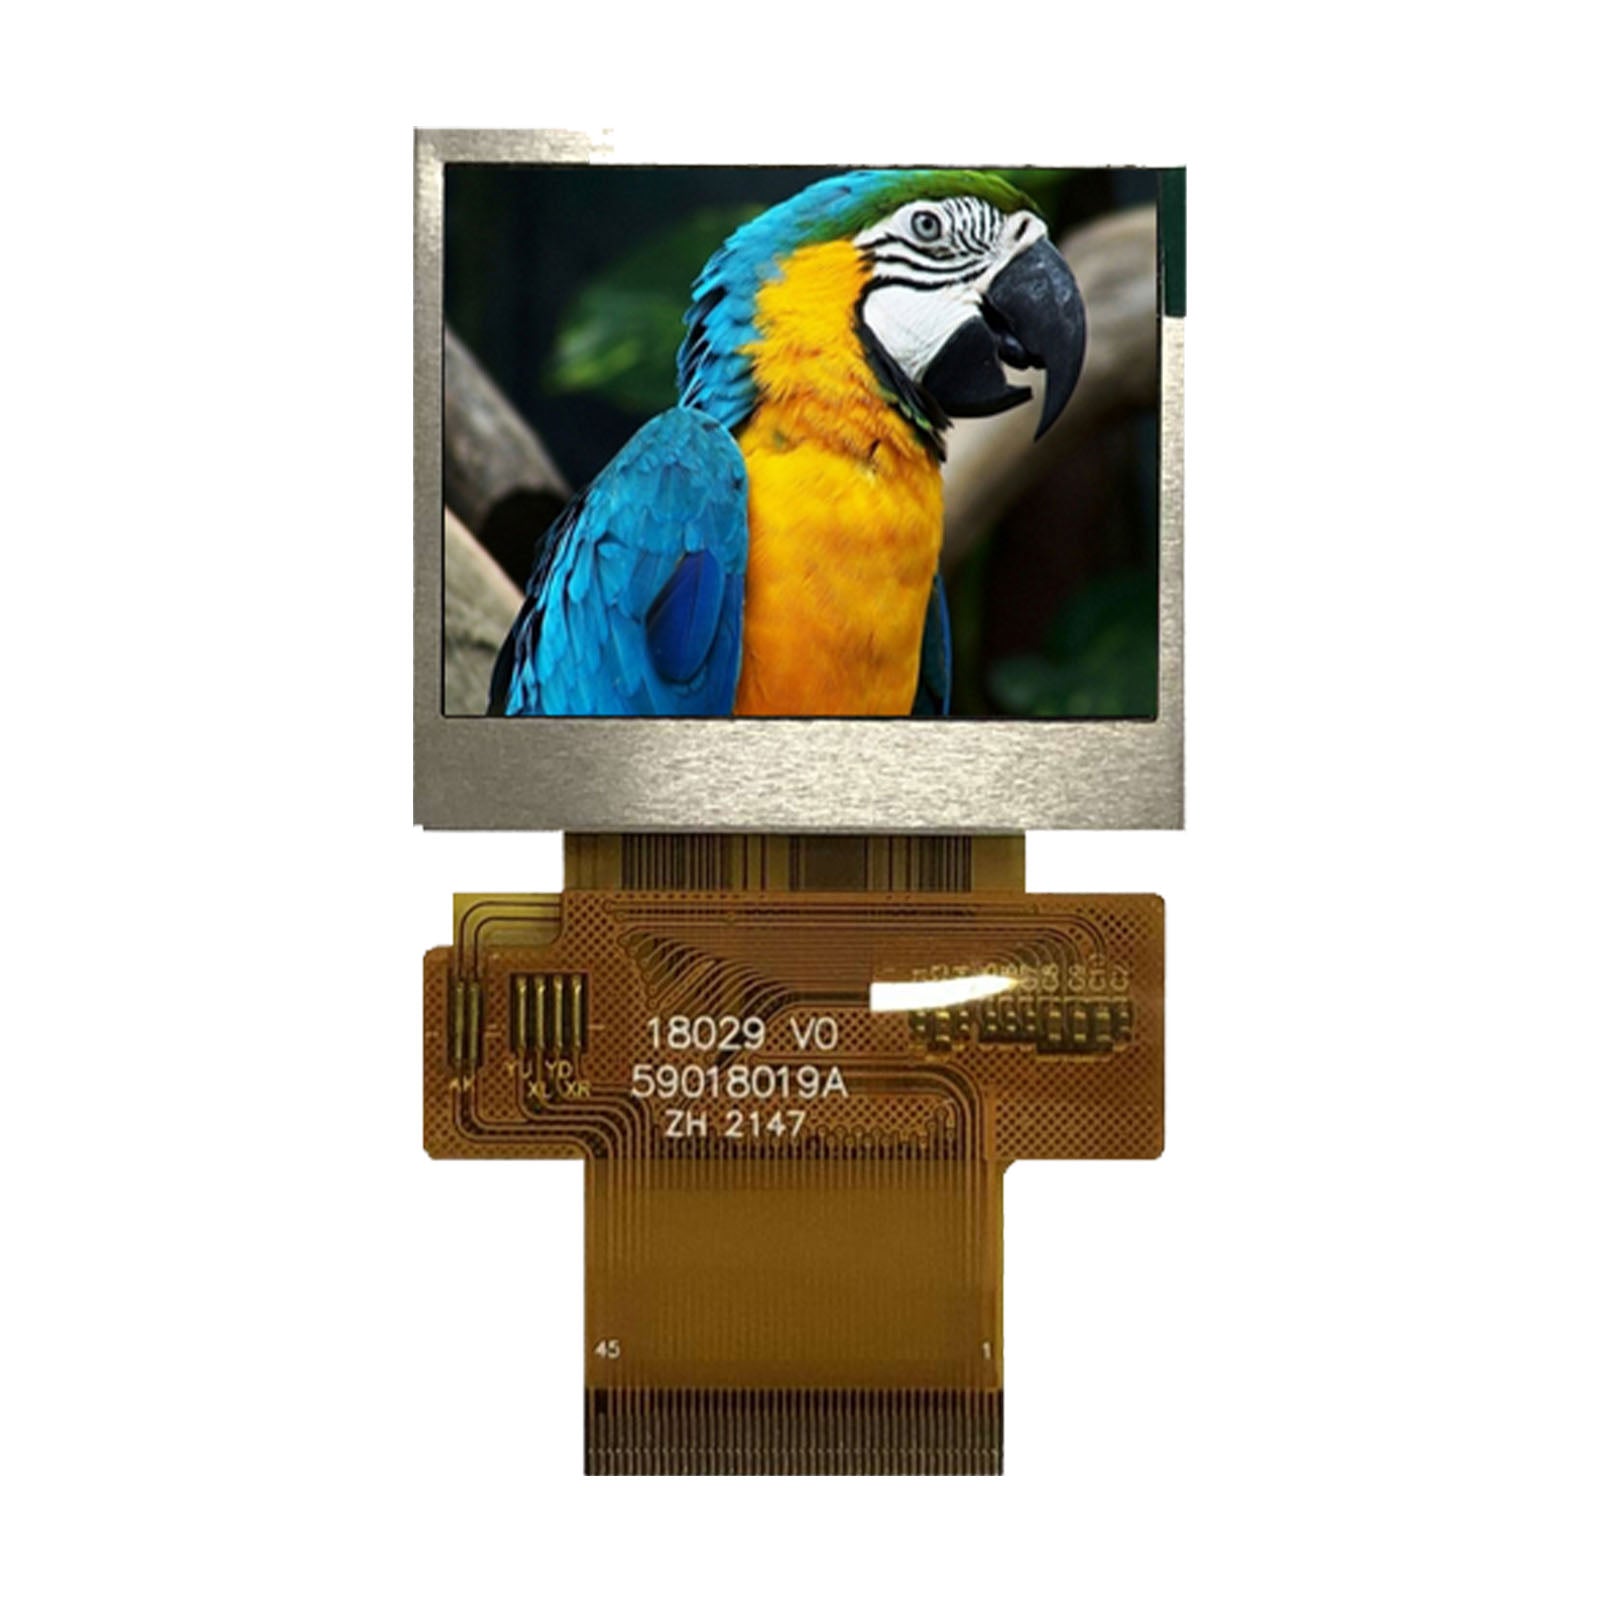 1.75-inch TFT display panel showing an image of a parrot